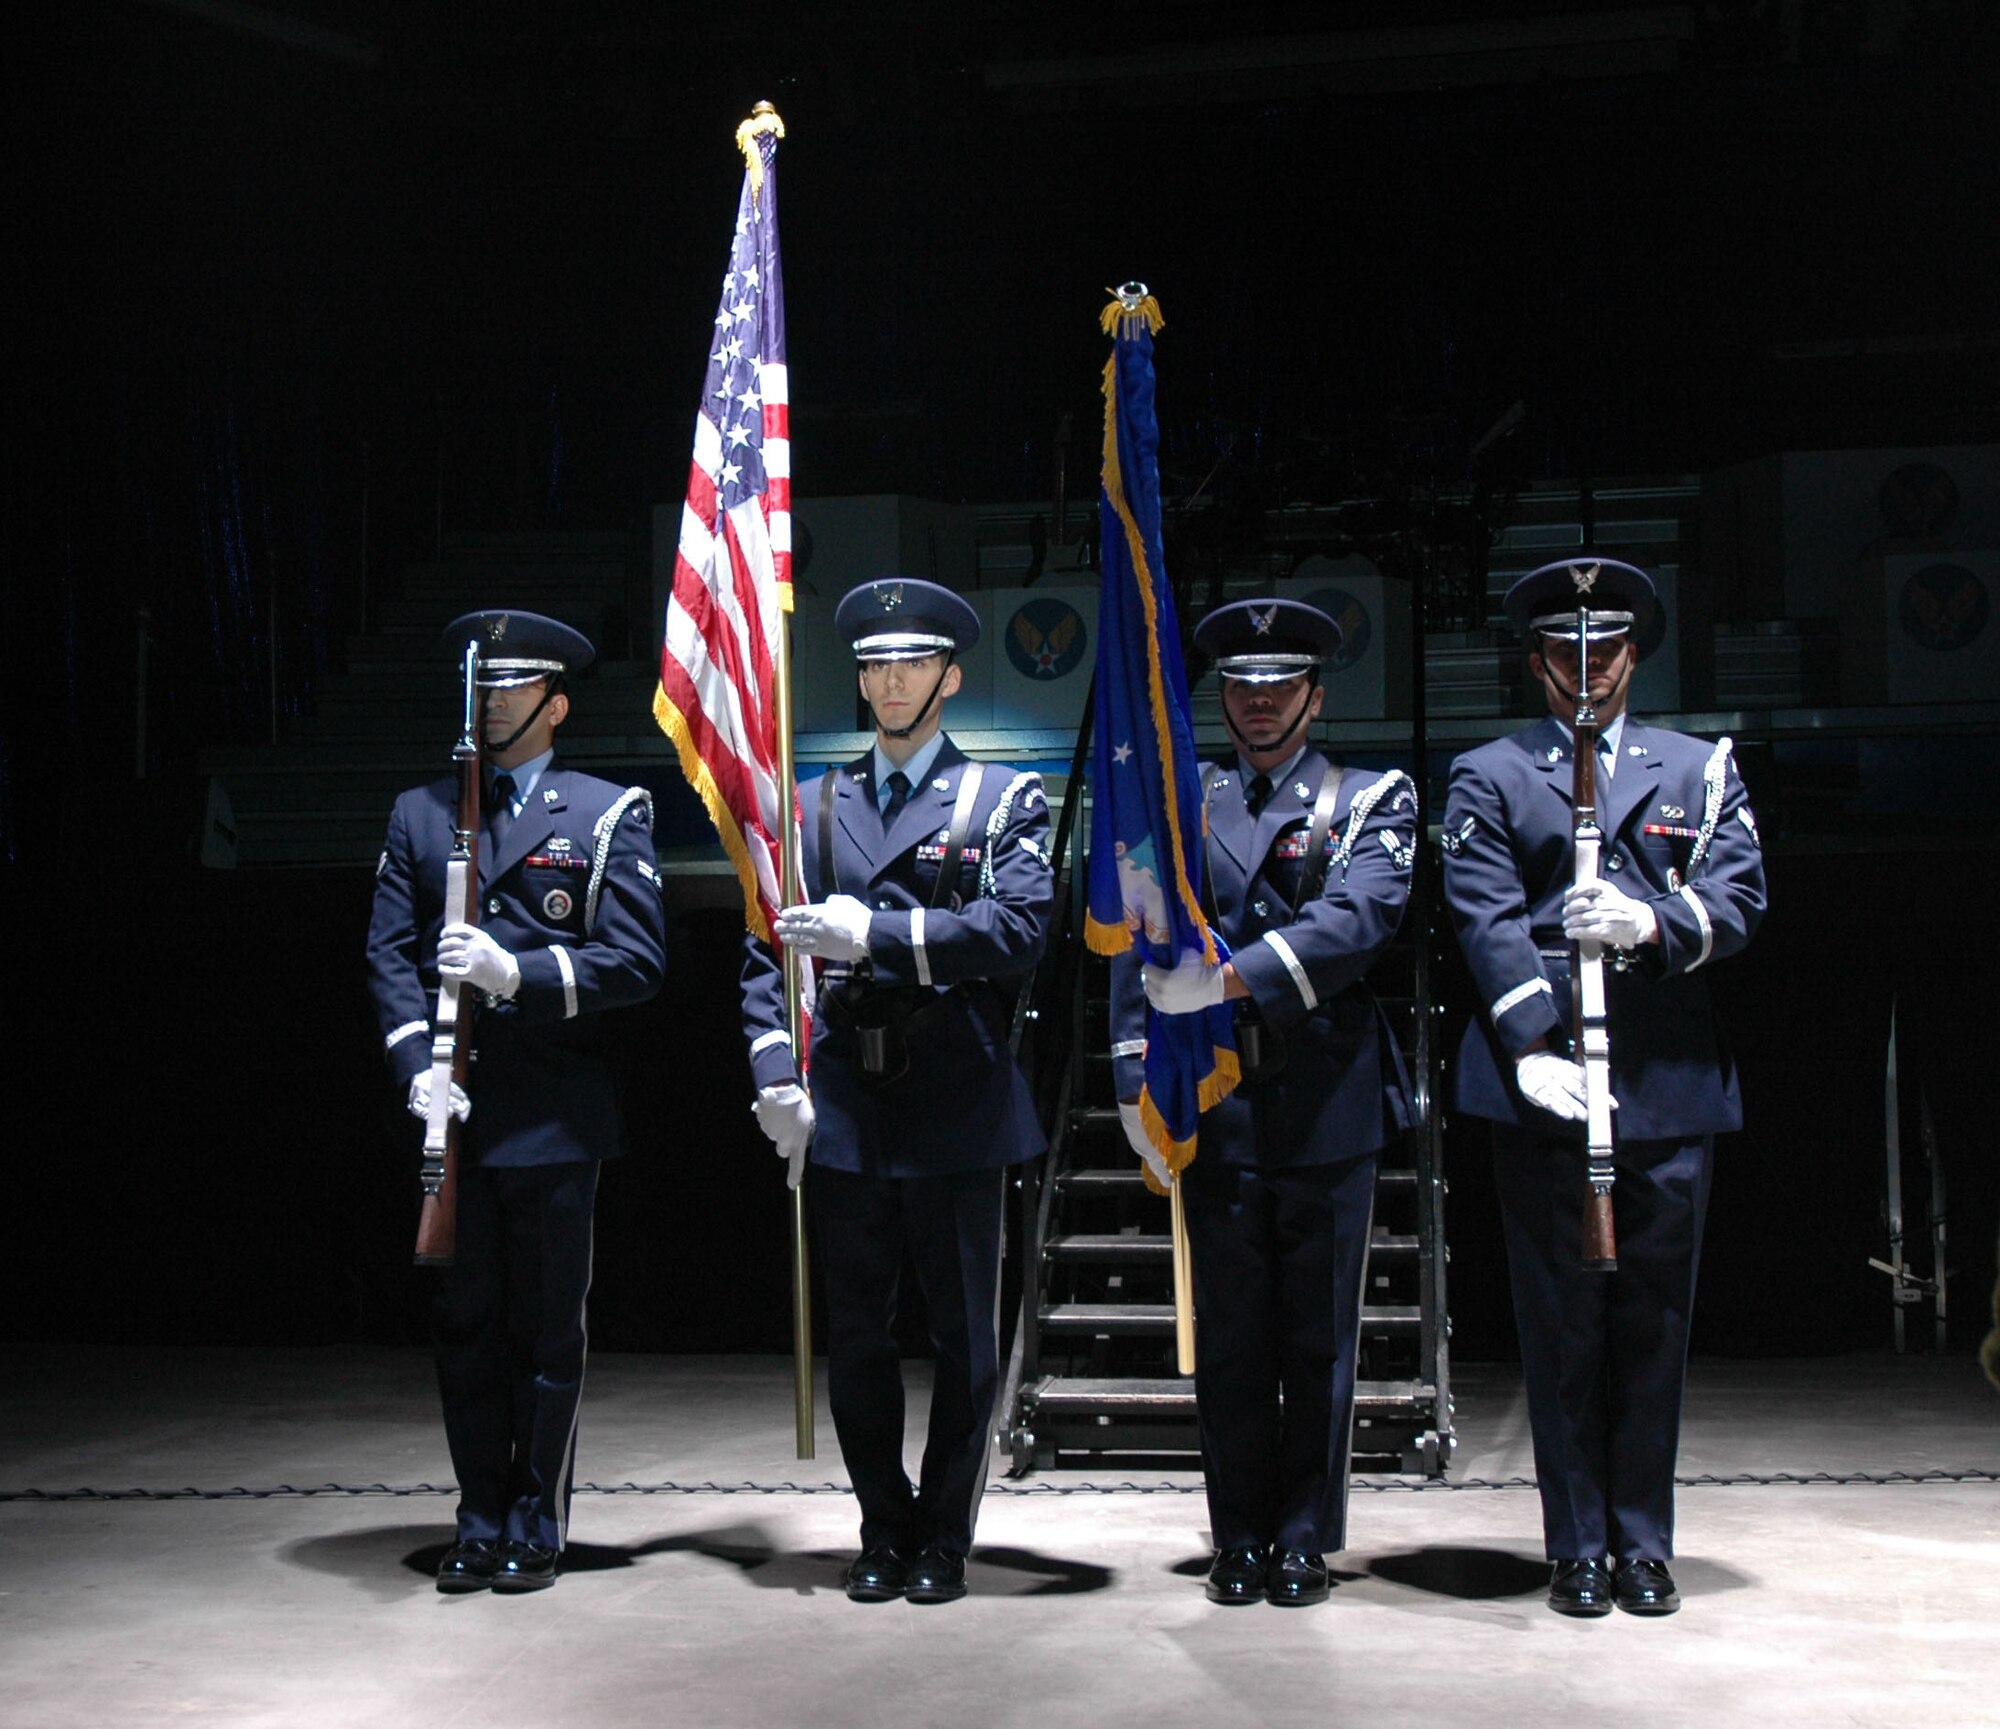 Members of Malmstrom Air Force Base honor guard present the colors prior to the 142nd Tops in Blue performance of the year at the Four Season's Arena in Great Falls Jan. 22. Tops in Blue is an all active-duty U.S. Air Force special unit comprised of 28 members picked for their talents in entertaining. The group sets up their own equipment weighing in at about 60,000 pounds and performs at 160 locations per year including deployed locations such as Afghanistan and Kyrgyzstan. This year's theme is “The Fly-By”, commemorating the Air Force's 60th Anniversary. (U.S. Air Force photo/Airman 1st Class Dillon White)